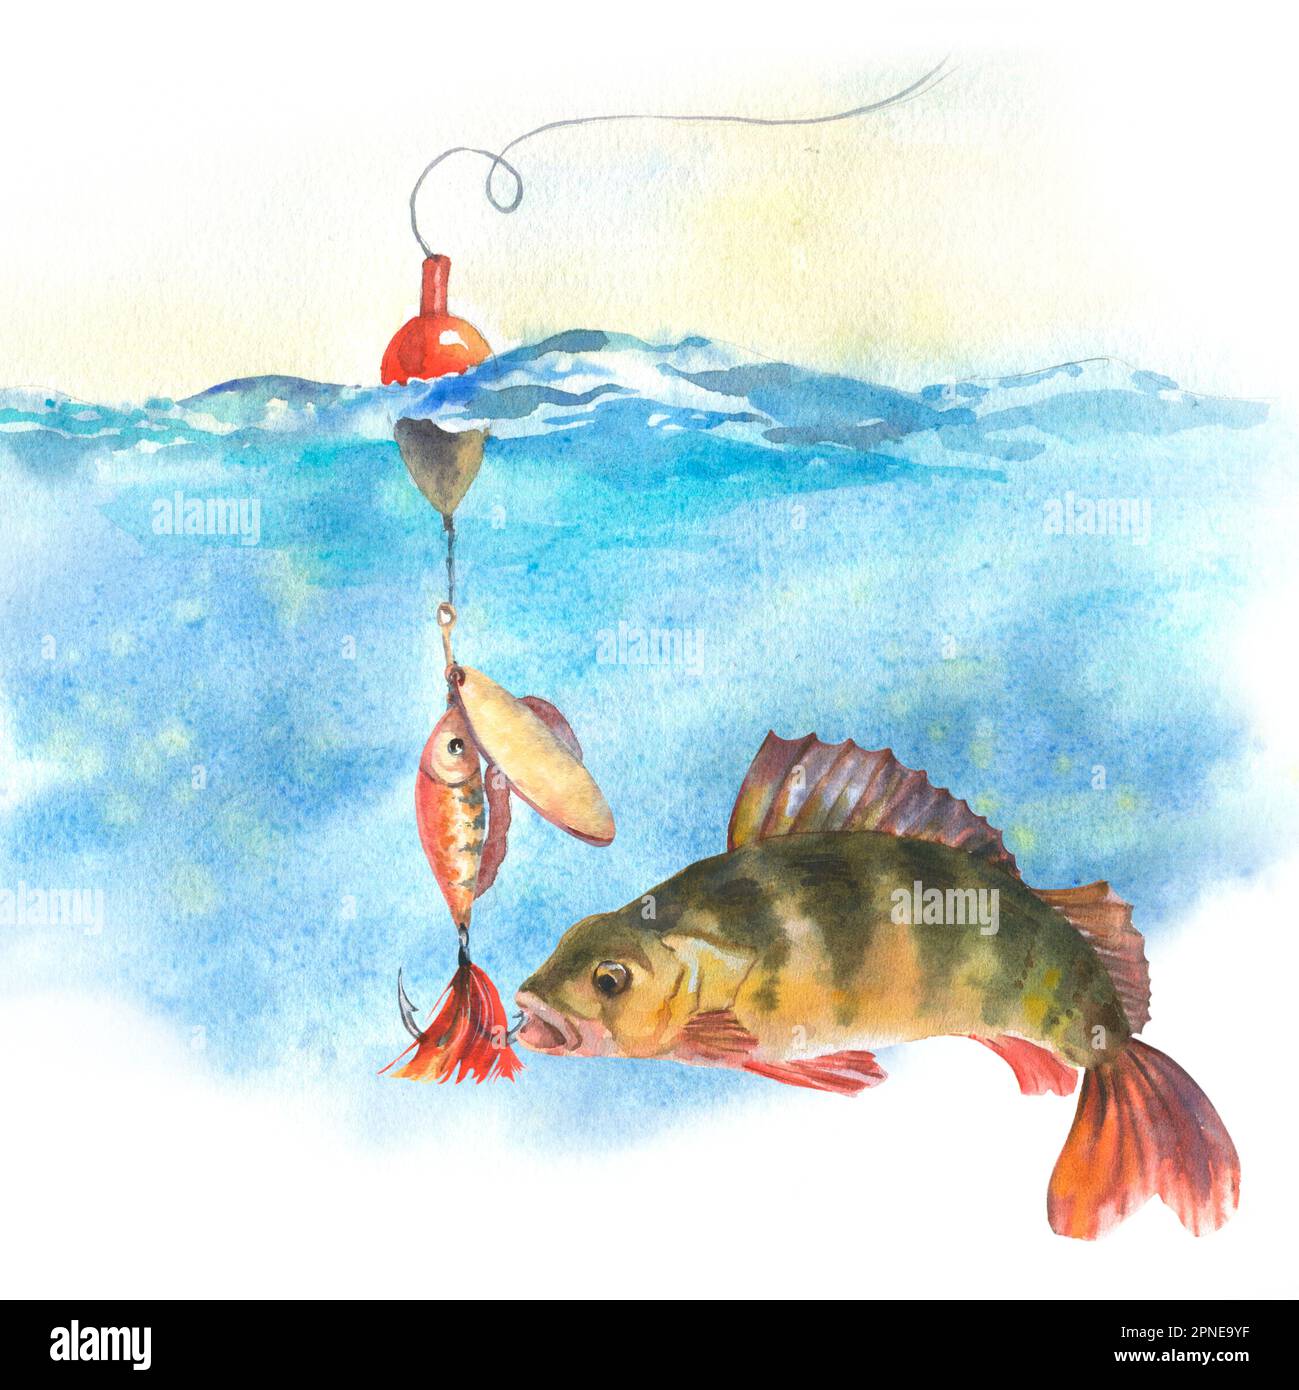 https://c8.alamy.com/comp/2PNE9YF/watercolor-illustration-perch-swims-up-to-a-fishing-hook-with-bait-underwater-isolated-on-a-white-background-illustration-can-be-used-on-postcards-2PNE9YF.jpg